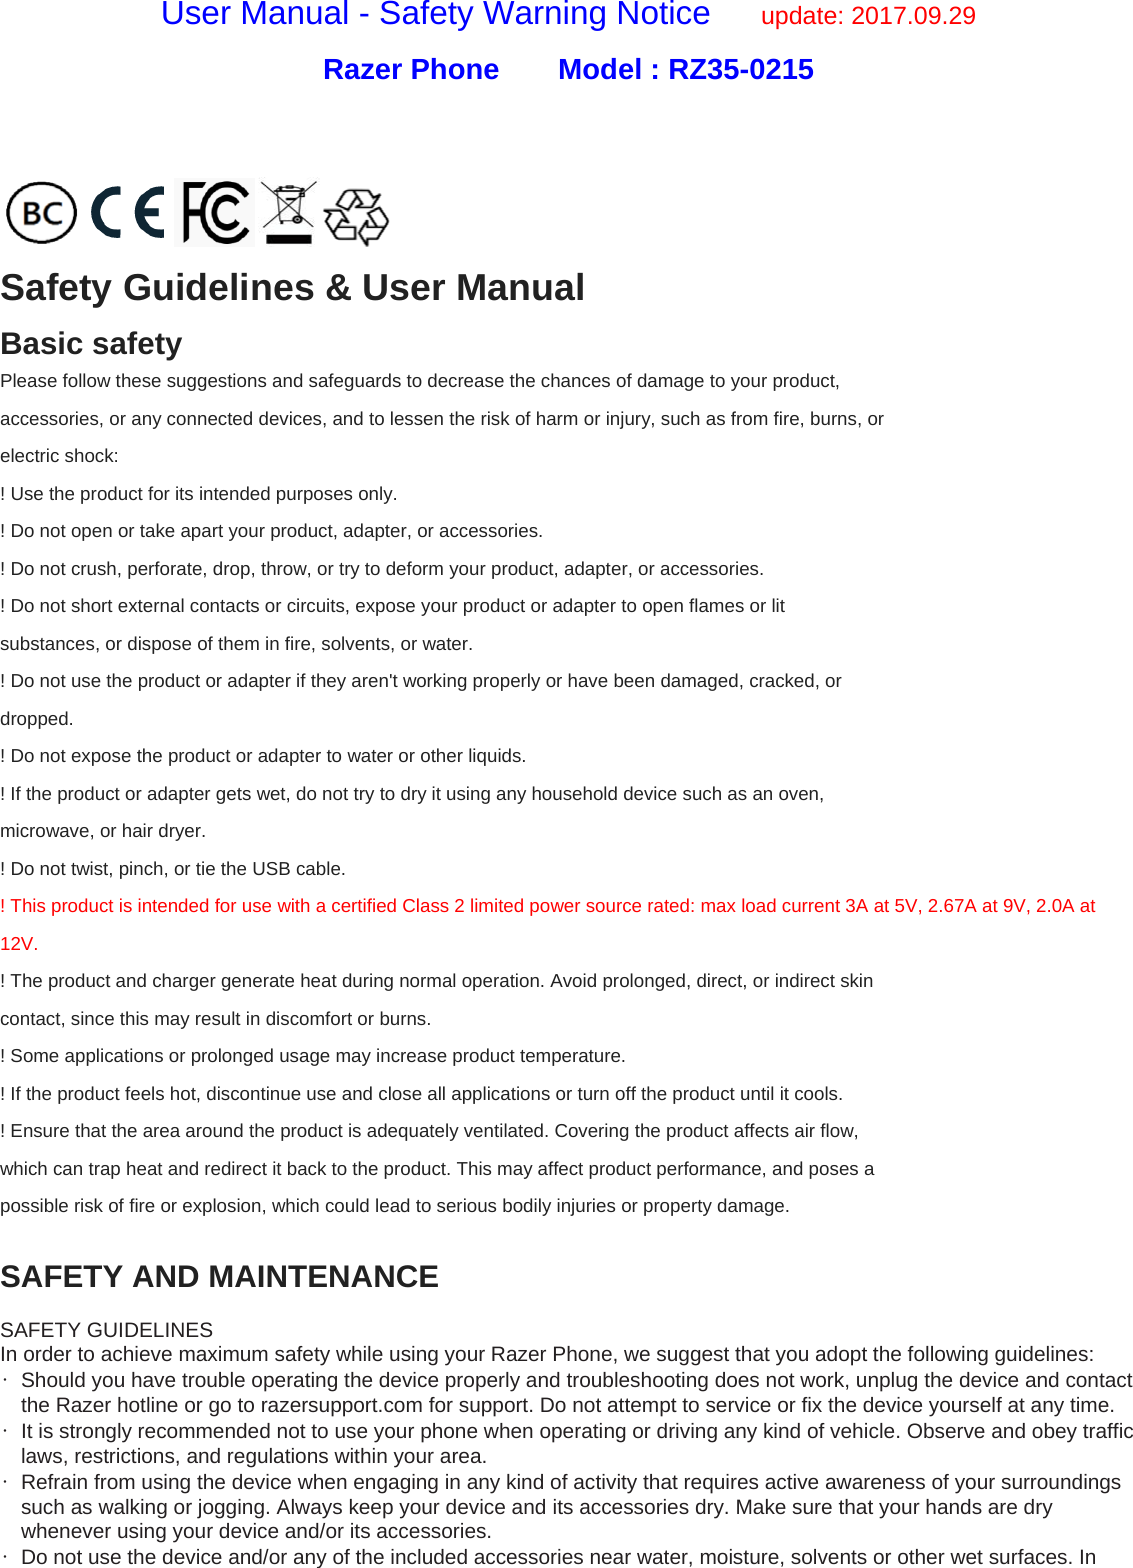 User Manual - Safety Warning Notice      update: 2017.09.29 Razer Phone    Model : RZ35-0215   Safety Guidelines &amp; User Manual Basic safety Please follow these suggestions and safeguards to decrease the chances of damage to your product, accessories, or any connected devices, and to lessen the risk of harm or injury, such as from fire, burns, or electric shock: ! Use the product for its intended purposes only. ! Do not open or take apart your product, adapter, or accessories. ! Do not crush, perforate, drop, throw, or try to deform your product, adapter, or accessories. ! Do not short external contacts or circuits, expose your product or adapter to open flames or lit substances, or dispose of them in fire, solvents, or water. ! Do not use the product or adapter if they aren&apos;t working properly or have been damaged, cracked, or dropped. ! Do not expose the product or adapter to water or other liquids. ! If the product or adapter gets wet, do not try to dry it using any household device such as an oven, microwave, or hair dryer. ! Do not twist, pinch, or tie the USB cable. ! This product is intended for use with a certified Class 2 limited power source rated: max load current 3A at 5V, 2.67A at 9V, 2.0A at 12V. ! The product and charger generate heat during normal operation. Avoid prolonged, direct, or indirect skin contact, since this may result in discomfort or burns. ! Some applications or prolonged usage may increase product temperature. ! If the product feels hot, discontinue use and close all applications or turn off the product until it cools. ! Ensure that the area around the product is adequately ventilated. Covering the product affects air flow, which can trap heat and redirect it back to the product. This may affect product performance, and poses a possible risk of fire or explosion, which could lead to serious bodily injuries or property damage.  SAFETY AND MAINTENANCE  SAFETY GUIDELINES In order to achieve maximum safety while using your Razer Phone, we suggest that you adopt the following guidelines: •  Should you have trouble operating the device properly and troubleshooting does not work, unplug the device and contact the Razer hotline or go to razersupport.com for support. Do not attempt to service or fix the device yourself at any time. •  It is strongly recommended not to use your phone when operating or driving any kind of vehicle. Observe and obey traffic laws, restrictions, and regulations within your area. •  Refrain from using the device when engaging in any kind of activity that requires active awareness of your surroundings such as walking or jogging. Always keep your device and its accessories dry. Make sure that your hands are dry whenever using your device and/or its accessories. •  Do not use the device and/or any of the included accessories near water, moisture, solvents or other wet surfaces. In 